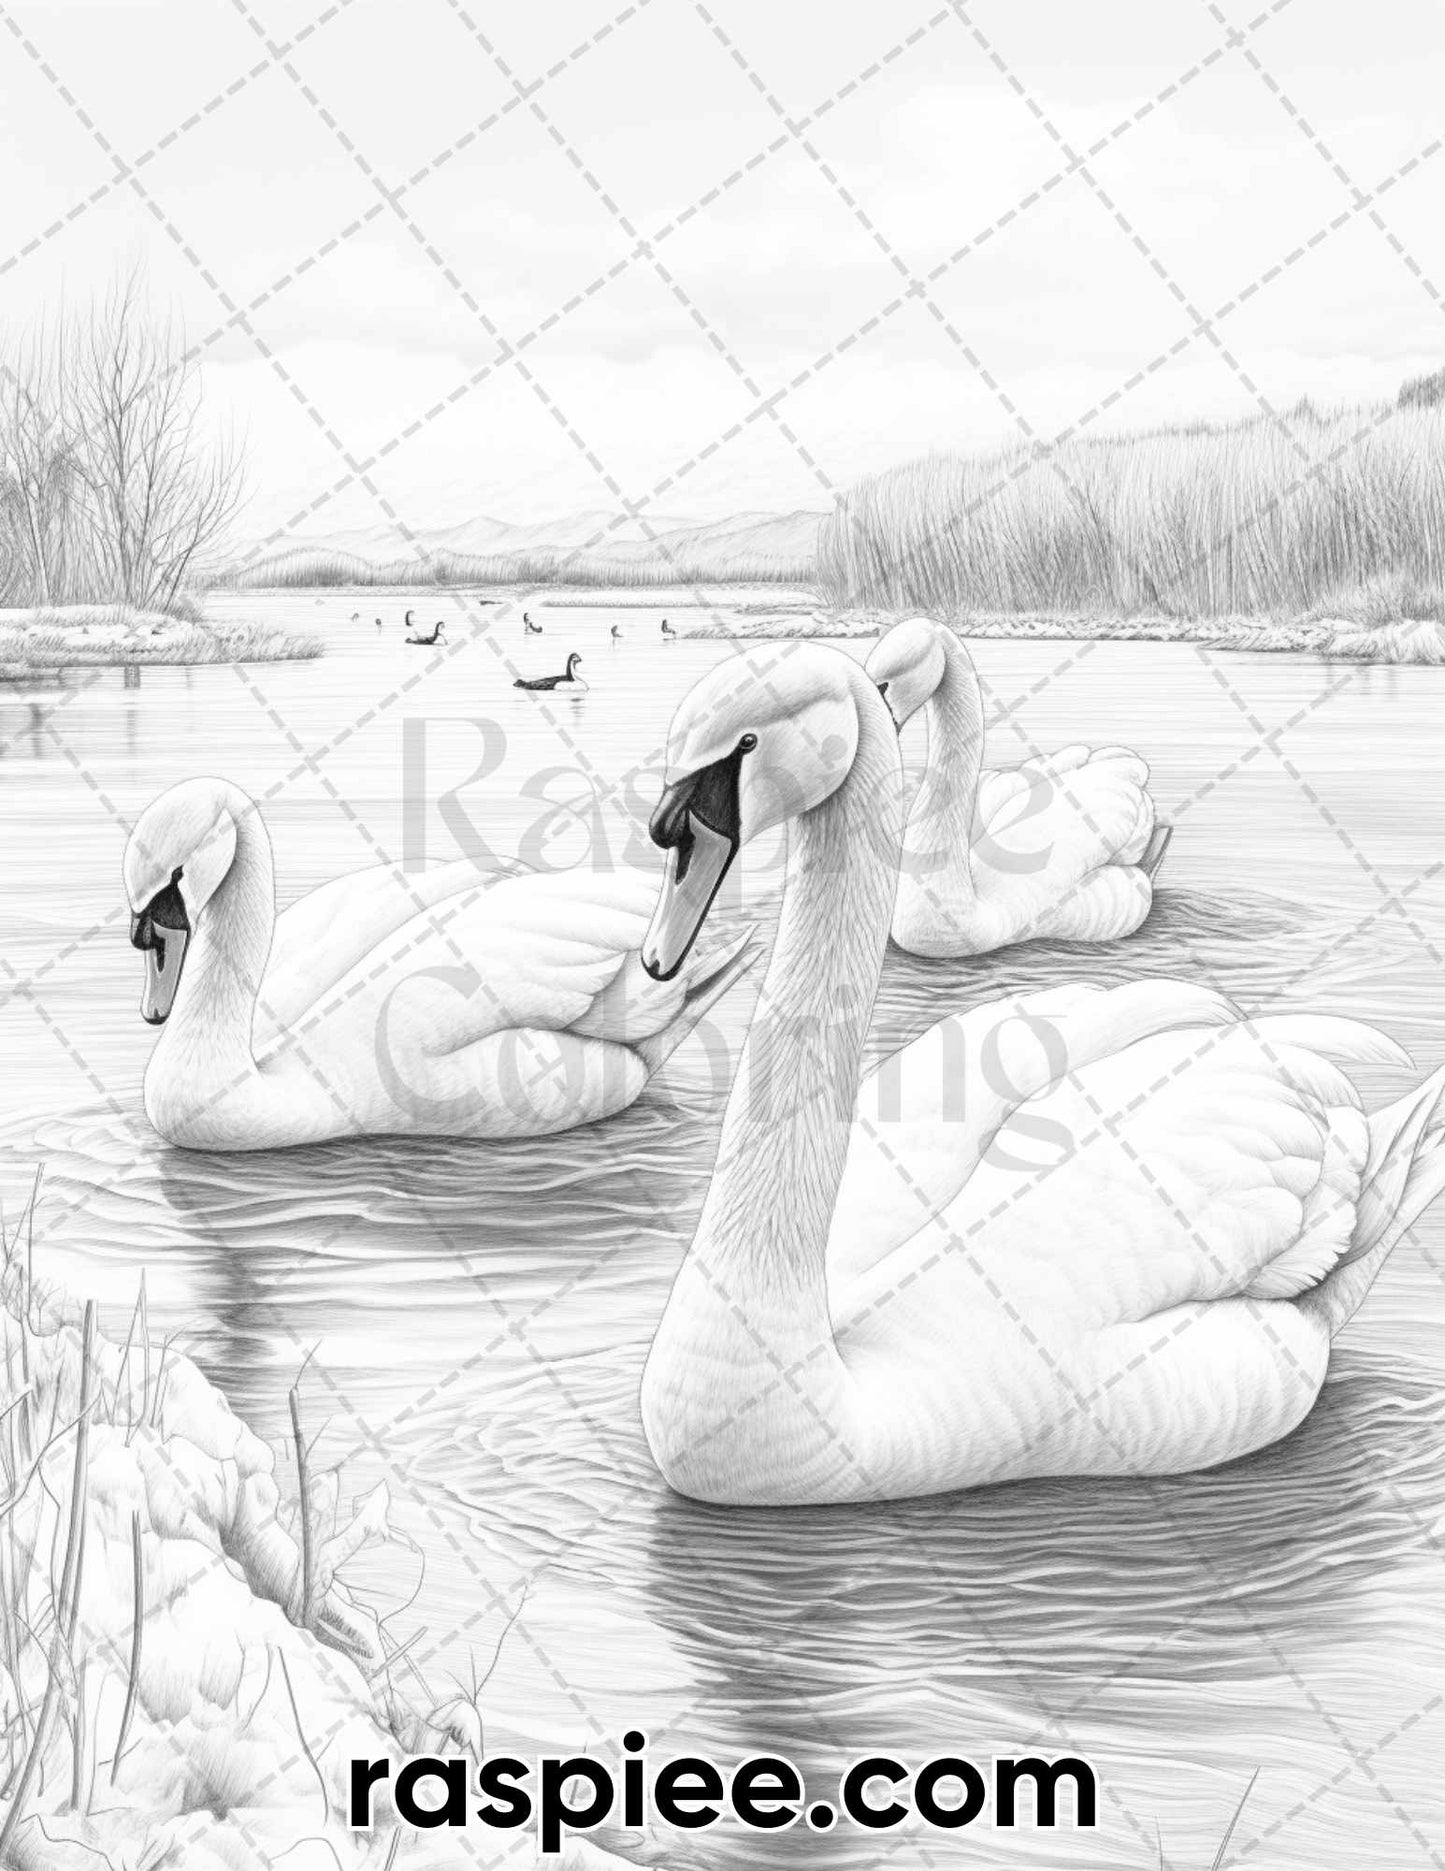 55 Winter Wildlife Grayscale Coloring Pages for Adults, Printable PDF Instant Download